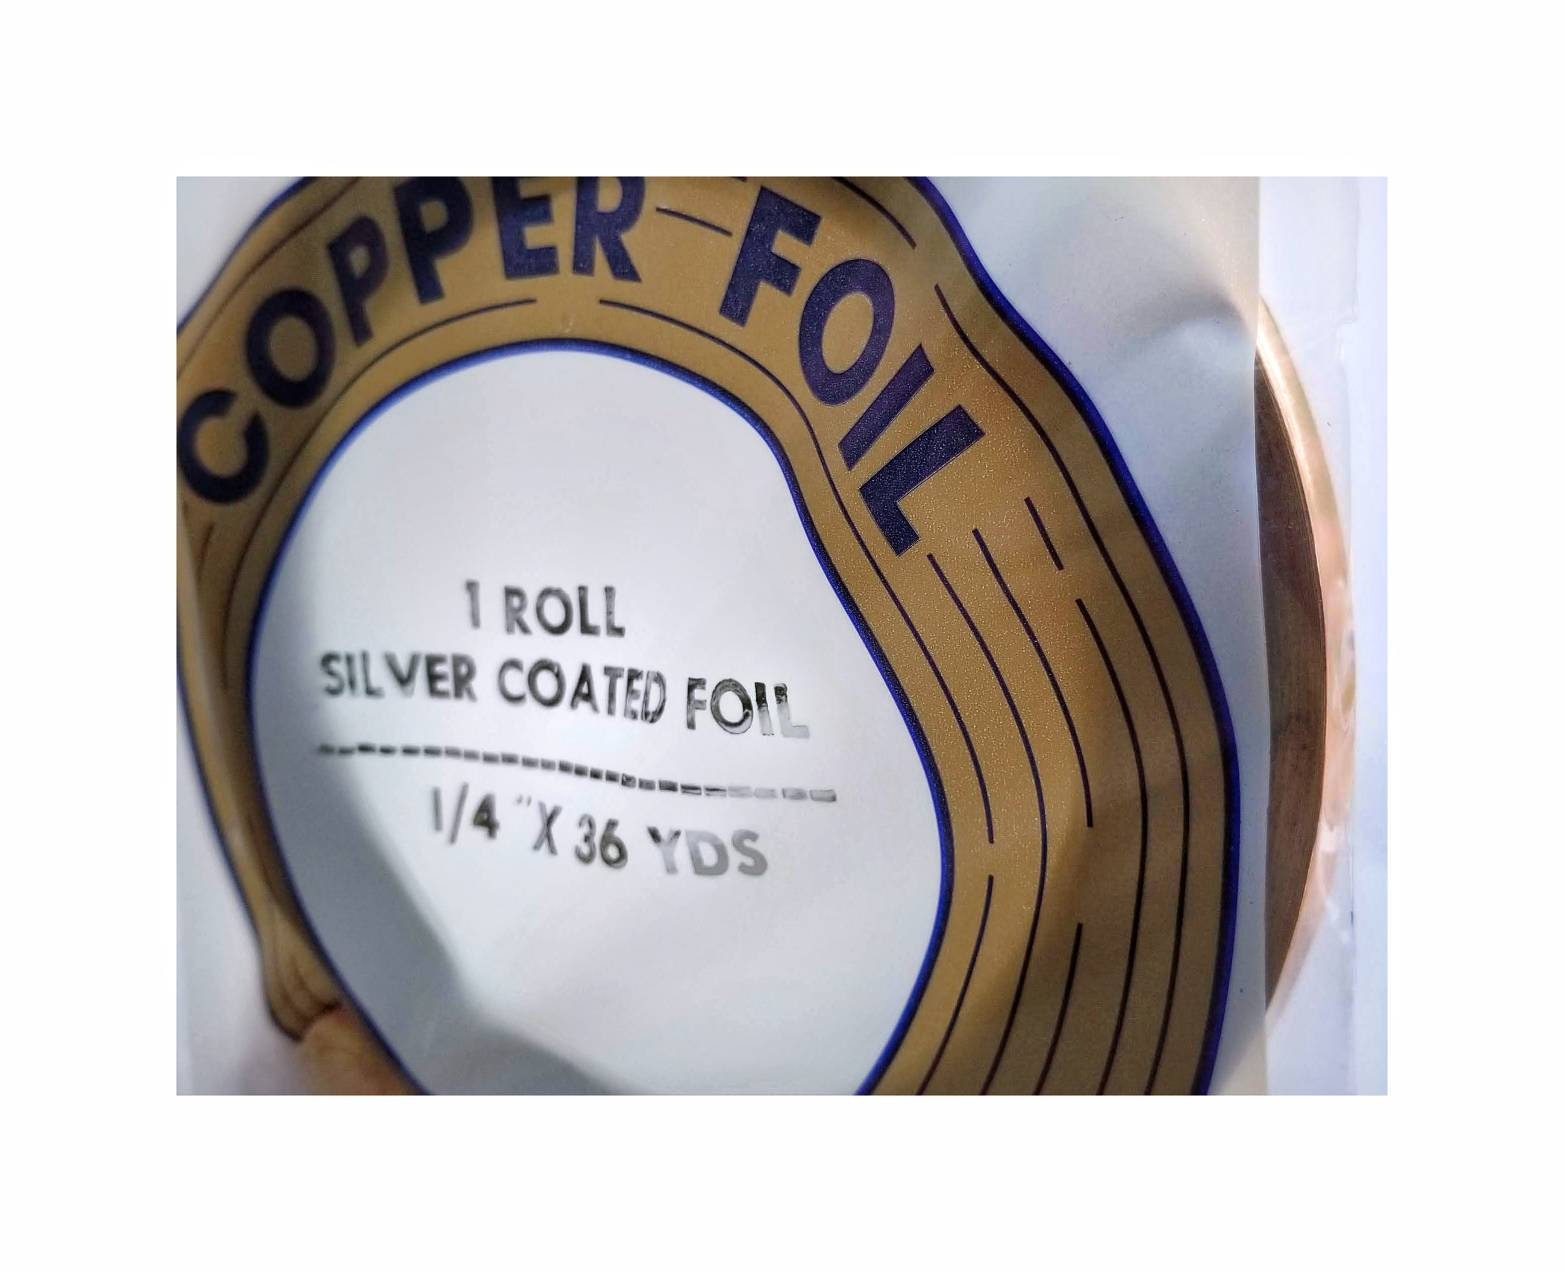 Buy Copper Foil Tape For Stained Glass online